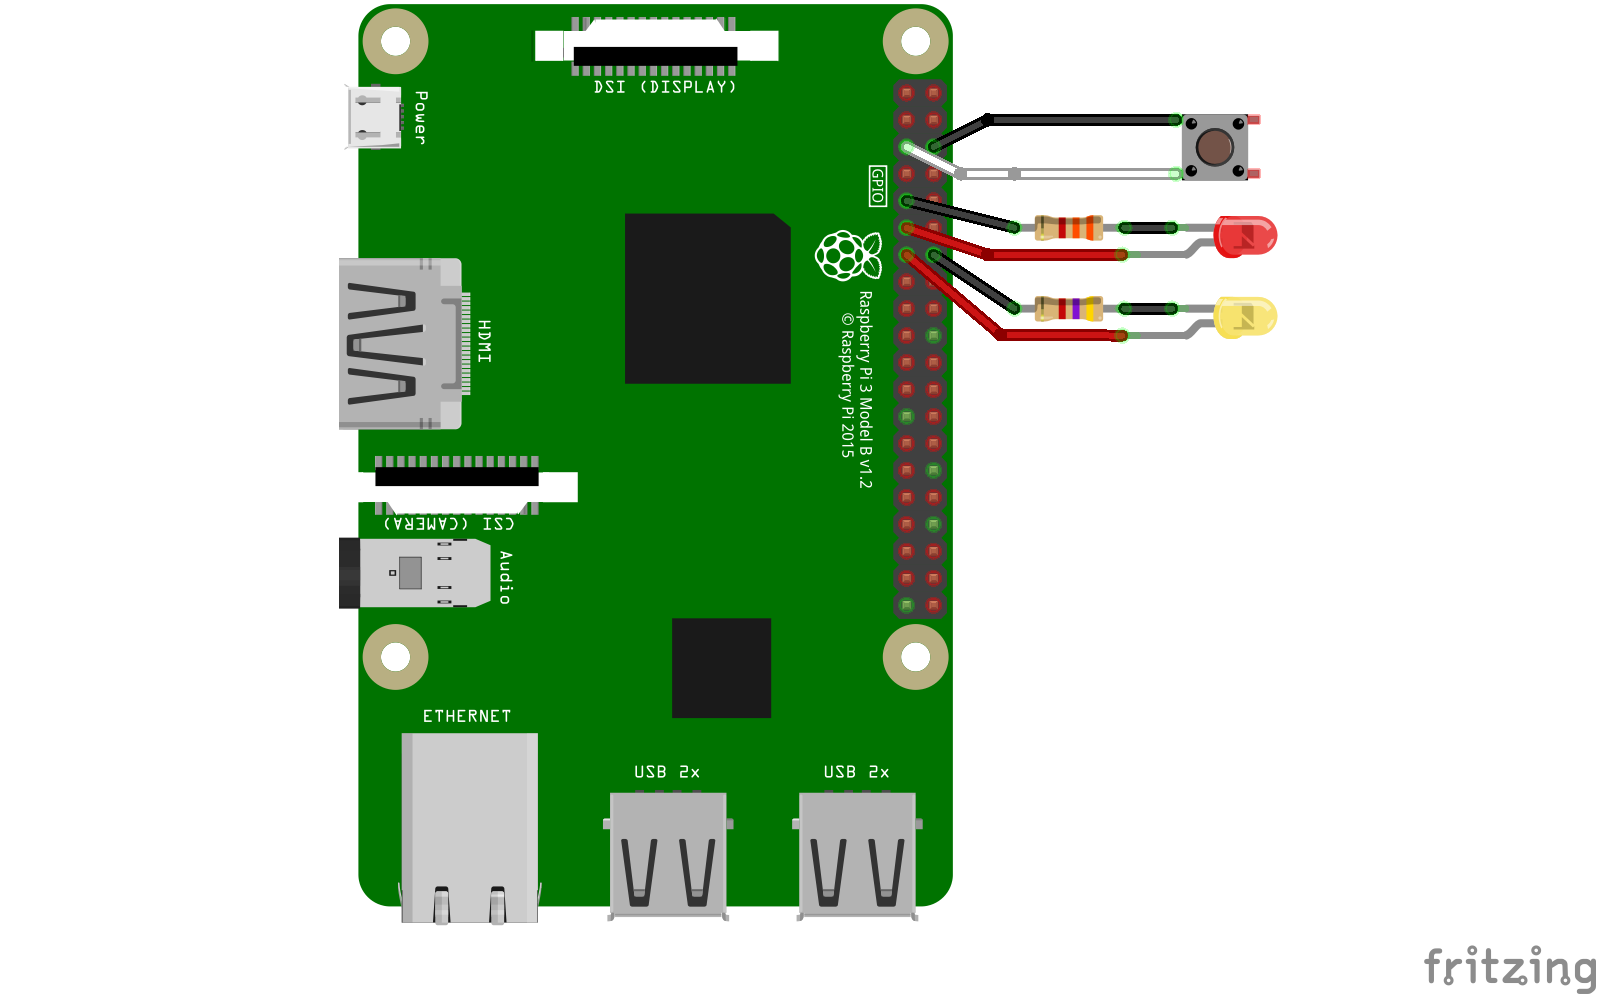 Raspberry Pi power button, power status and activity status led wiring diagram